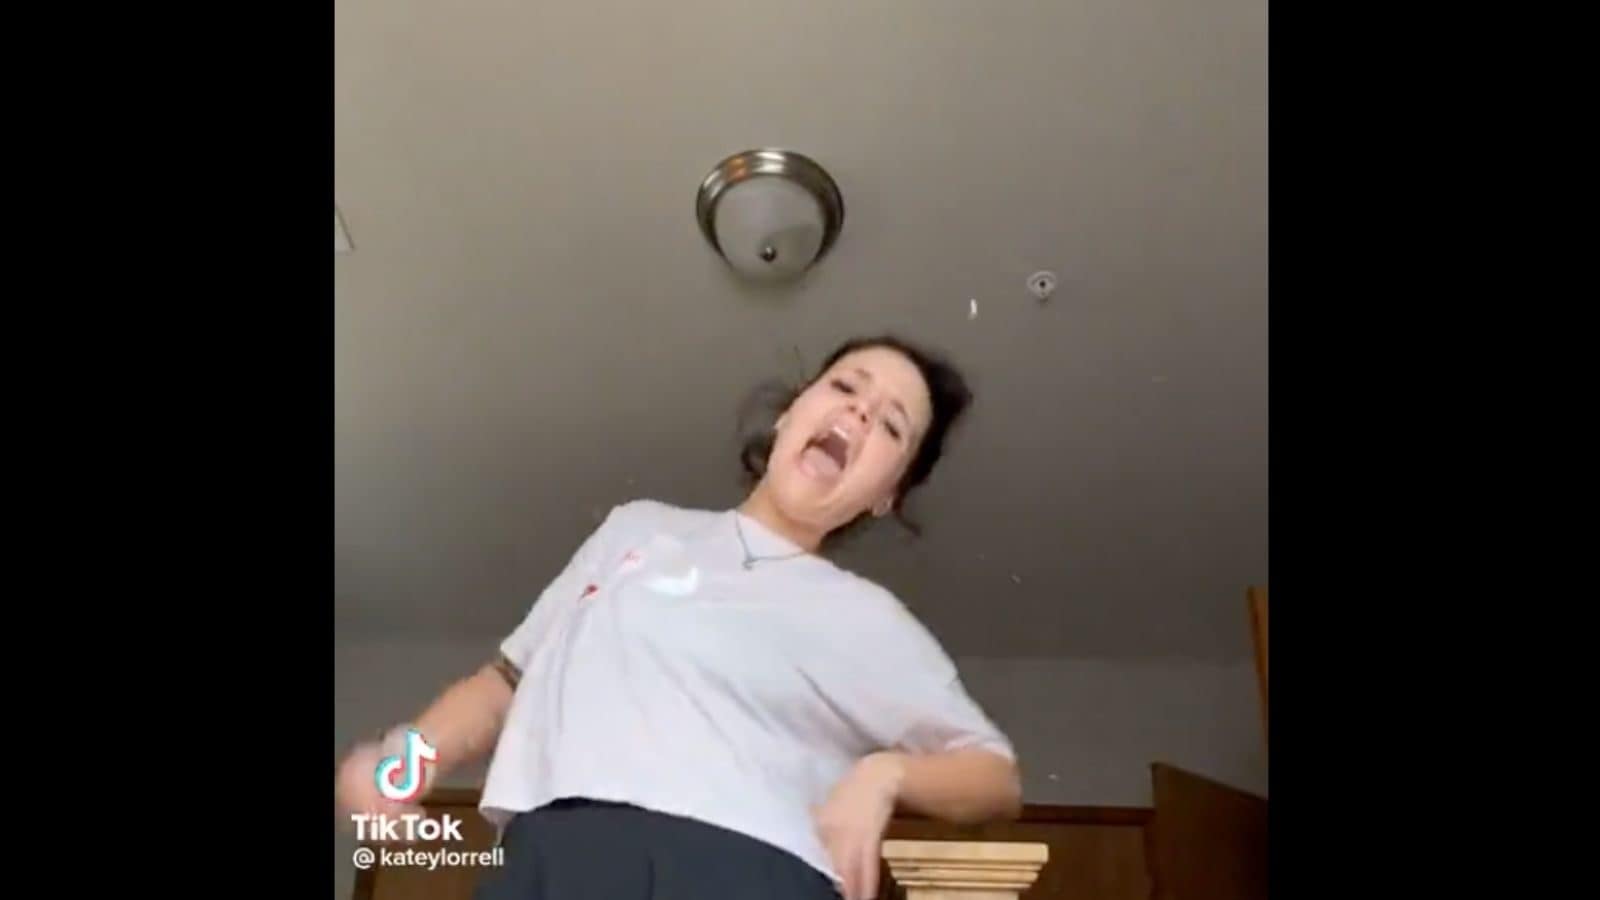 TikTok Woman Bumped into Her Bed While Filming Video and Became a Global  Meme